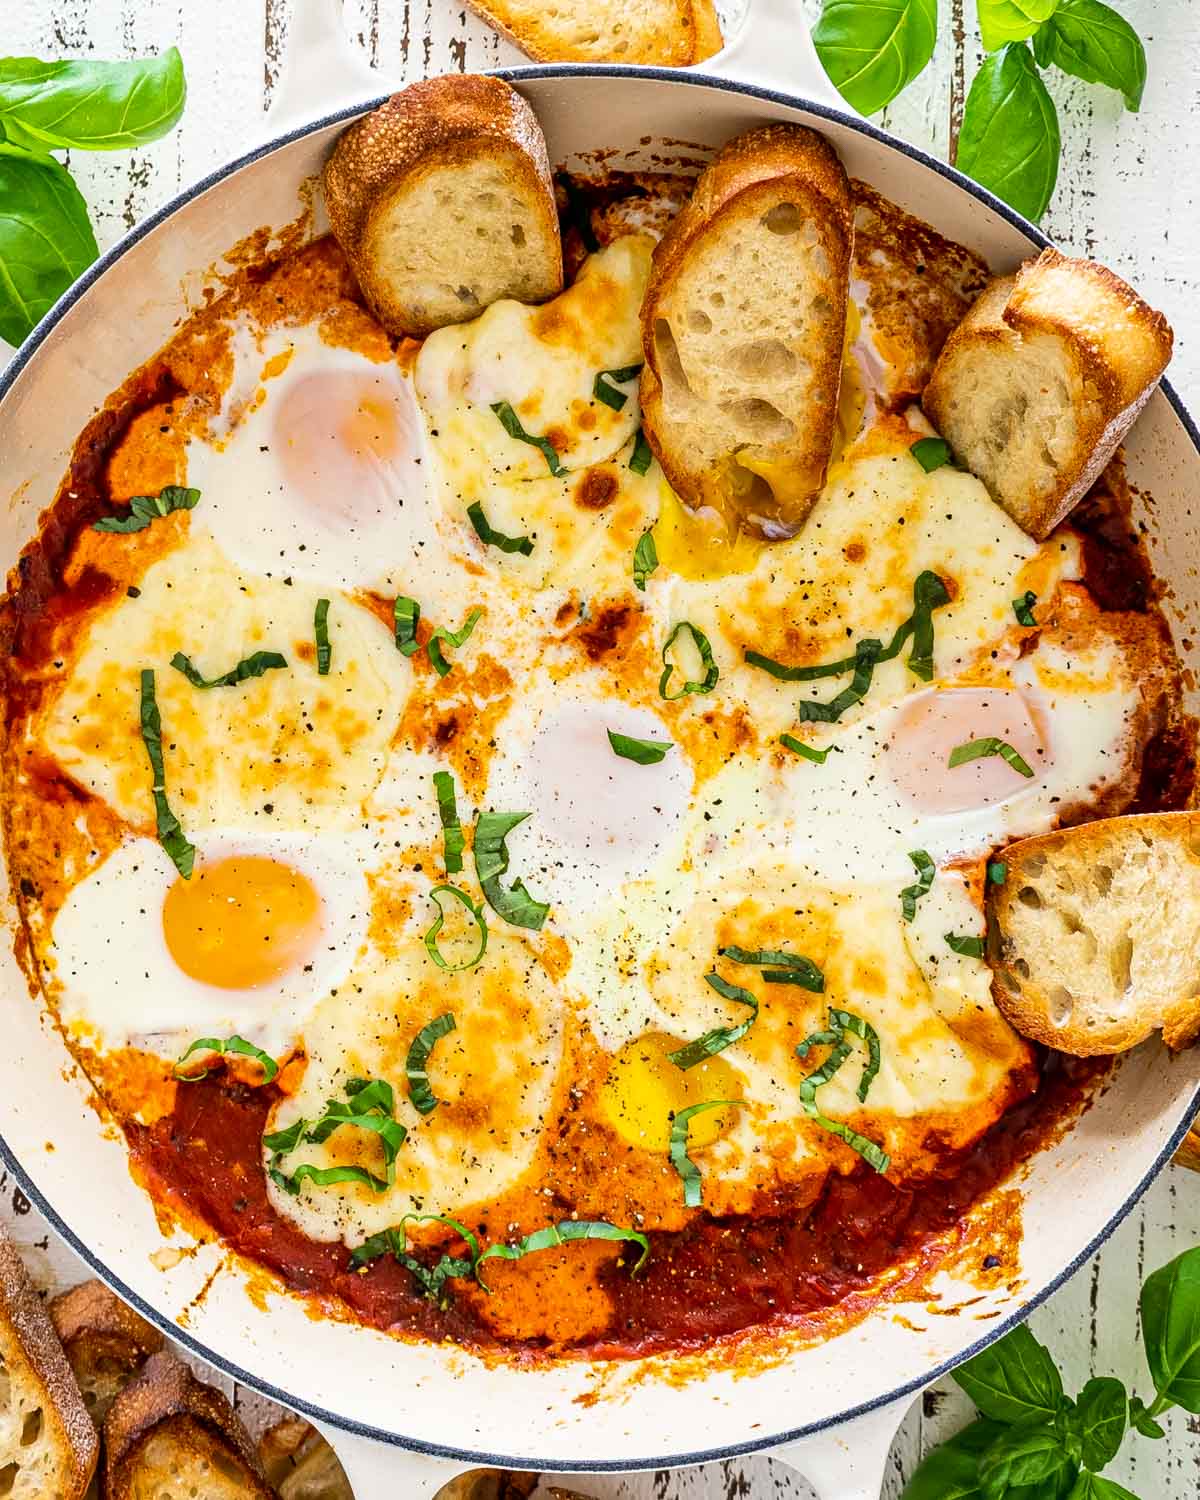 freshly made shakshuka in a beige skillet with some toasted bread.